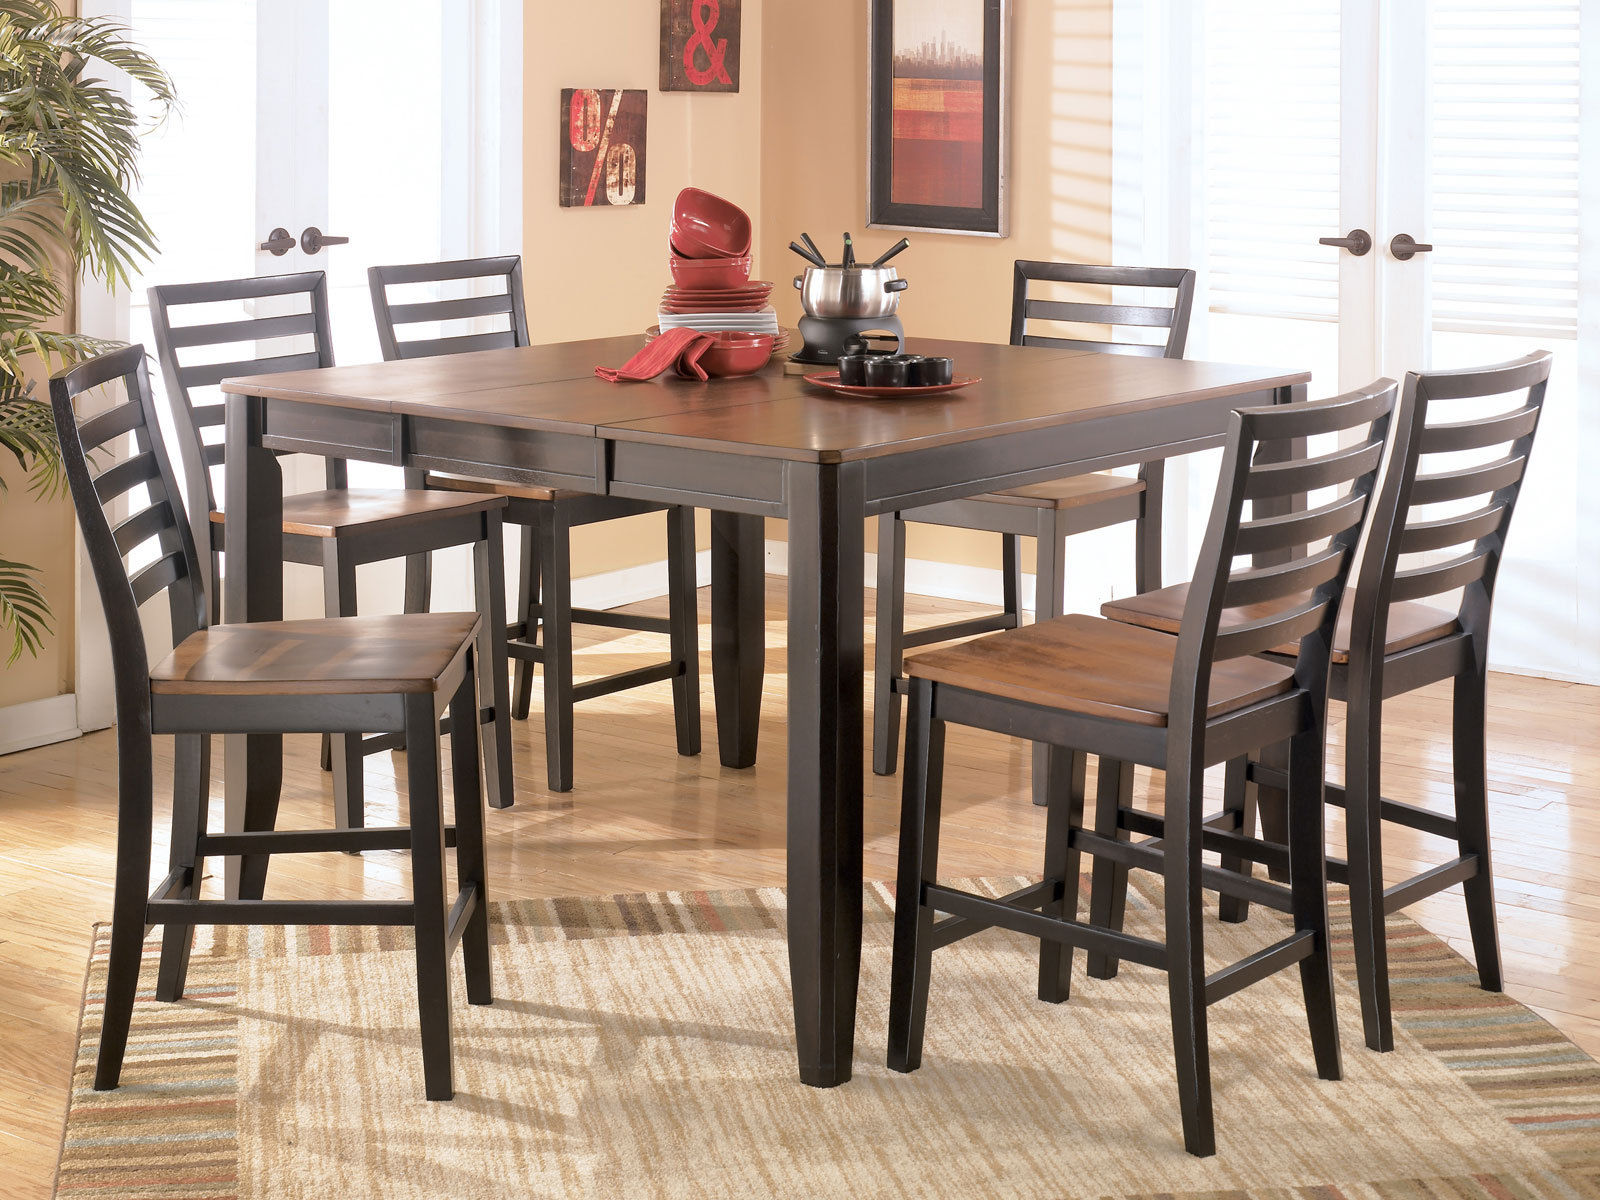 Dark Brown Of Astounding Dark Brown Color Furniture Of Contemporary Dining Room Sets With Square Wooden Table Coupled With Chairs And Completed With Dining Fixtures Dining Room The Design Contemporary Dining Room Sets